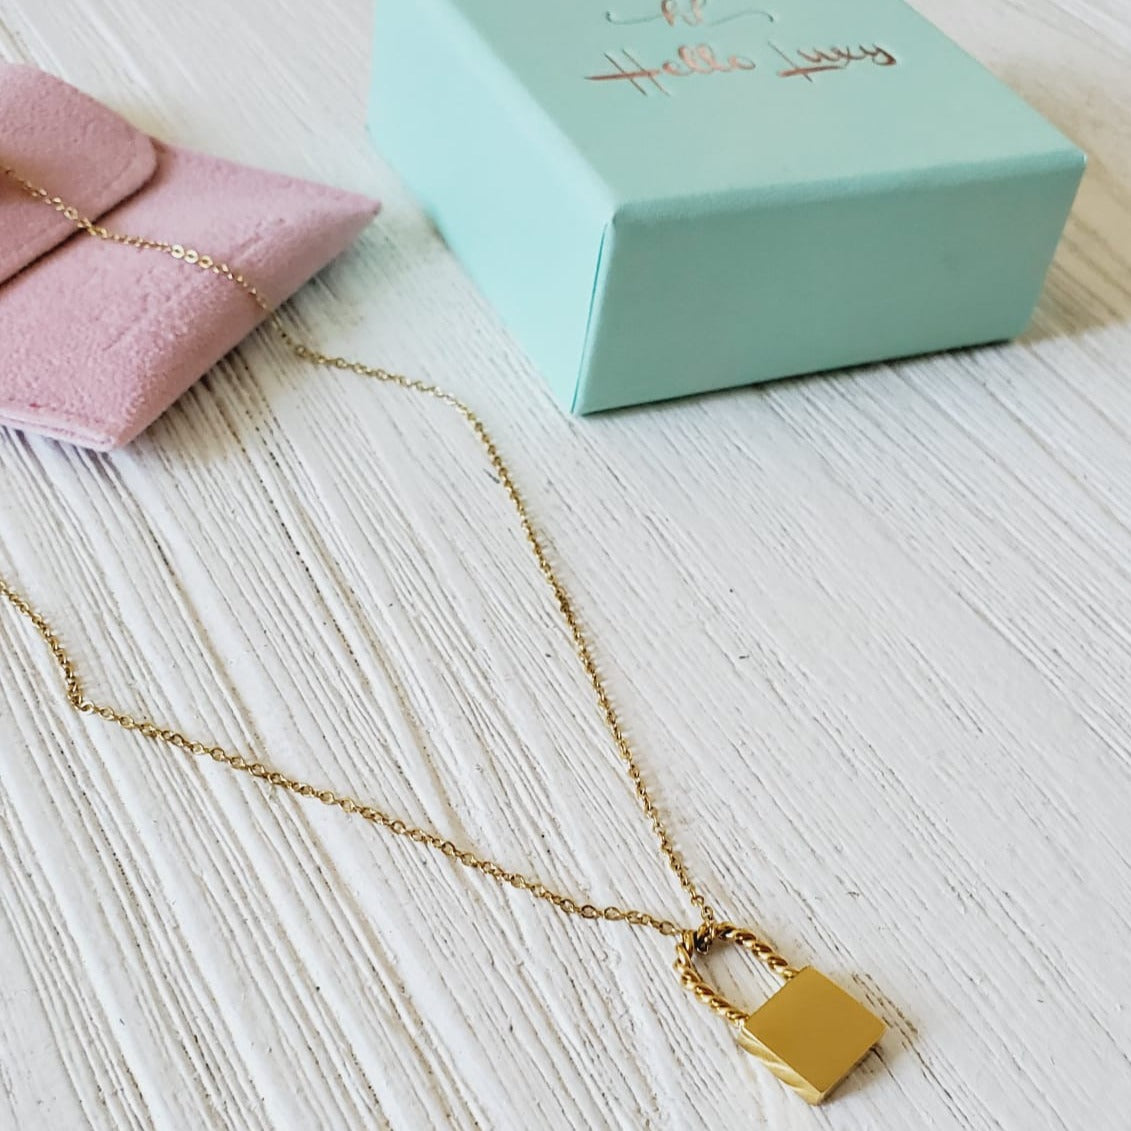 Tiny Lock Necklace, Dainty Necklace, Silver or Gold Jewelry, Layer  Necklace, Gifts for Her, Necklaces for Women, Padlock Necklace